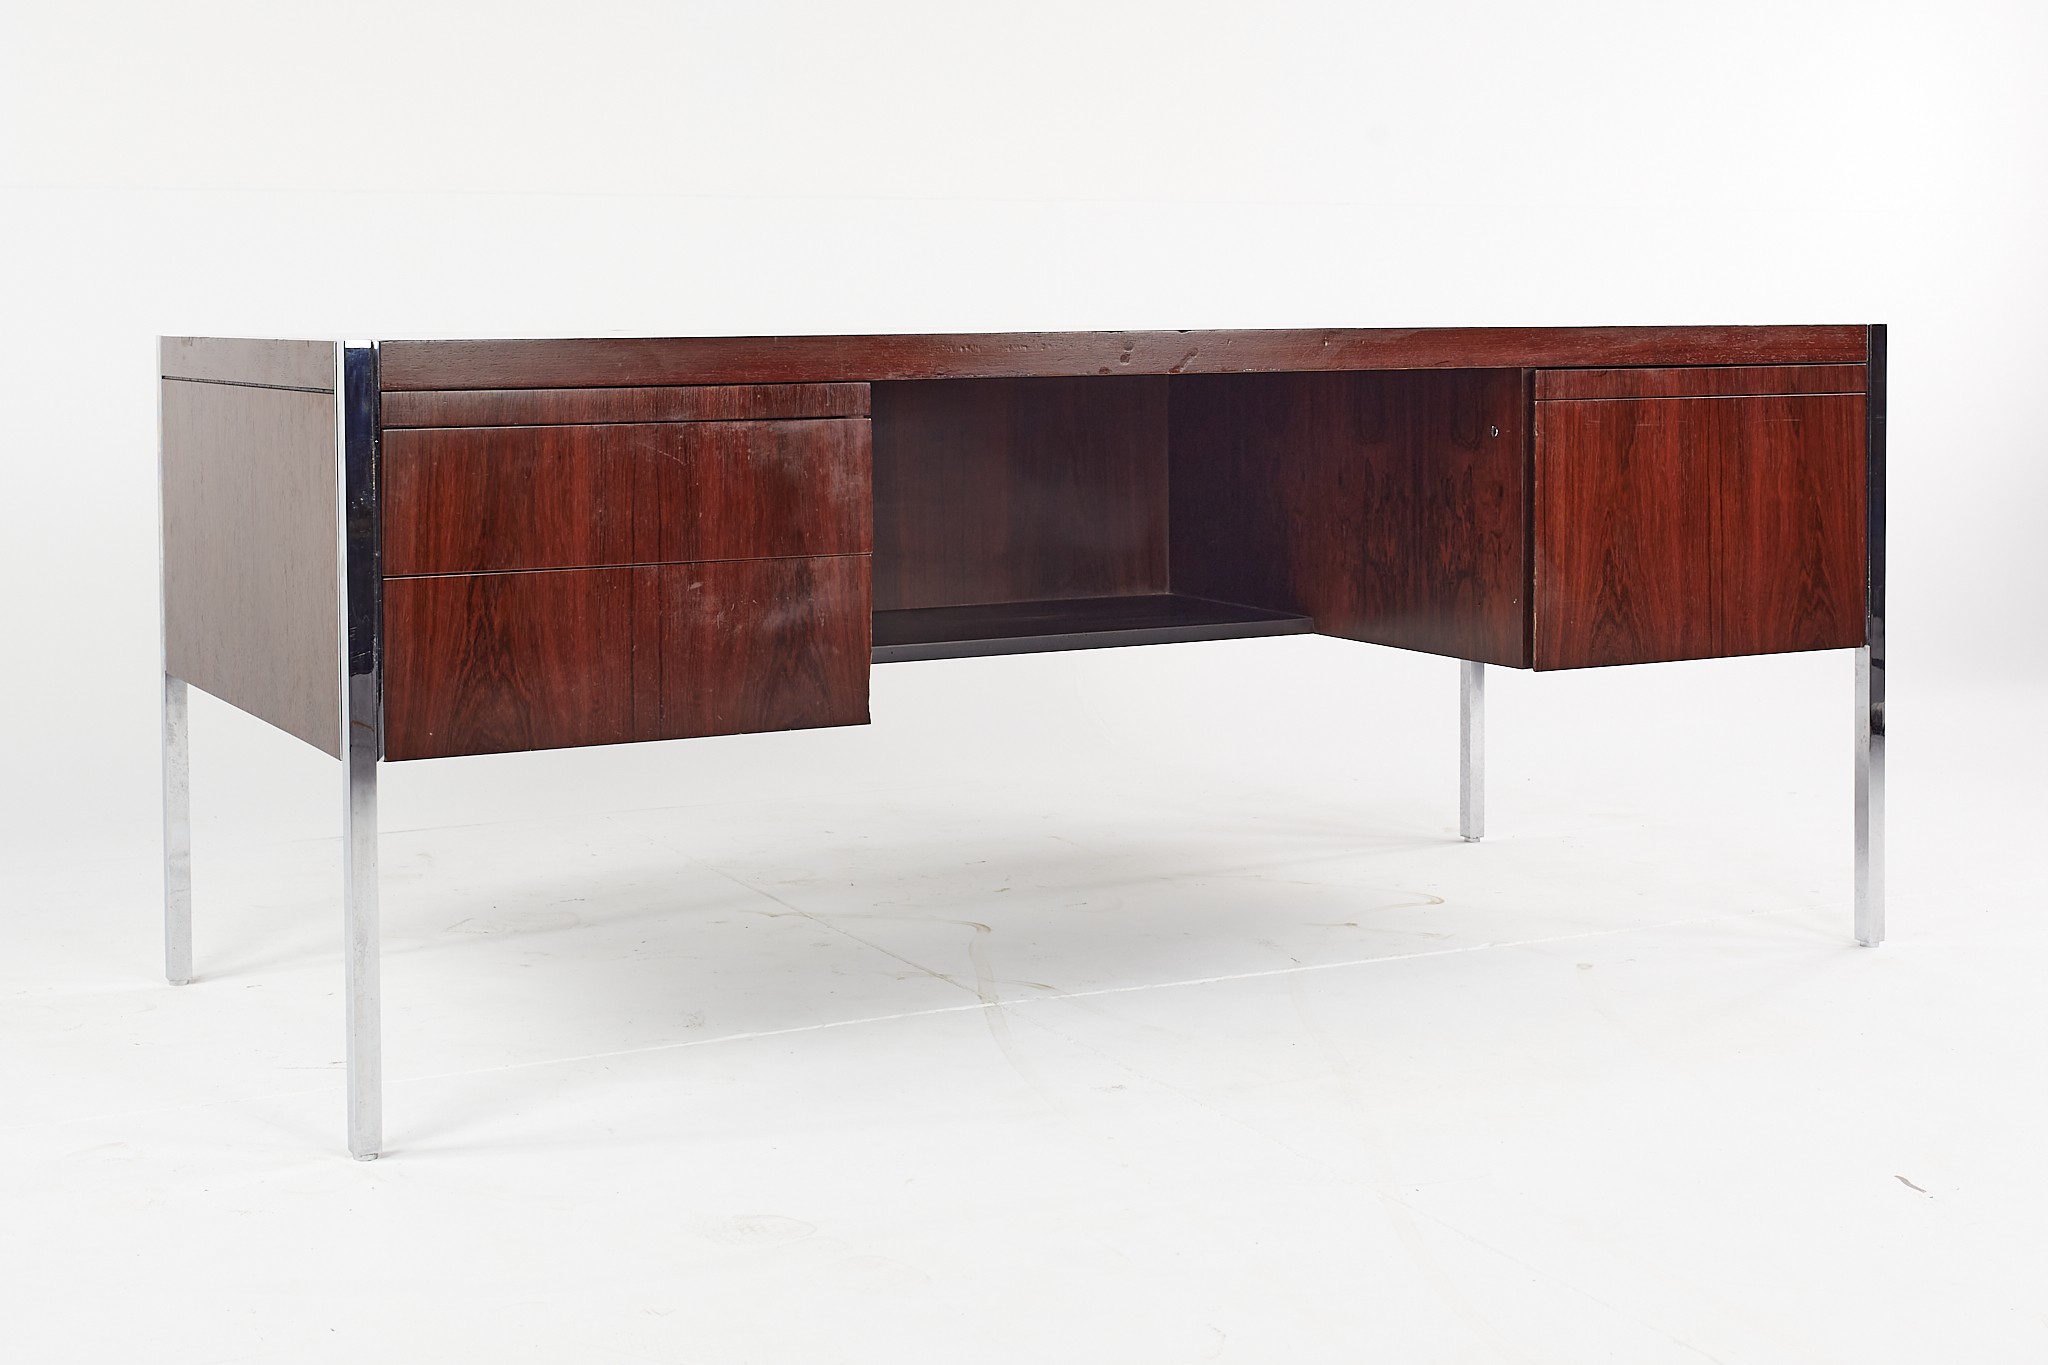 Richard Schultz for Knoll Mid Century Rosewood and Chrome Executive Desk